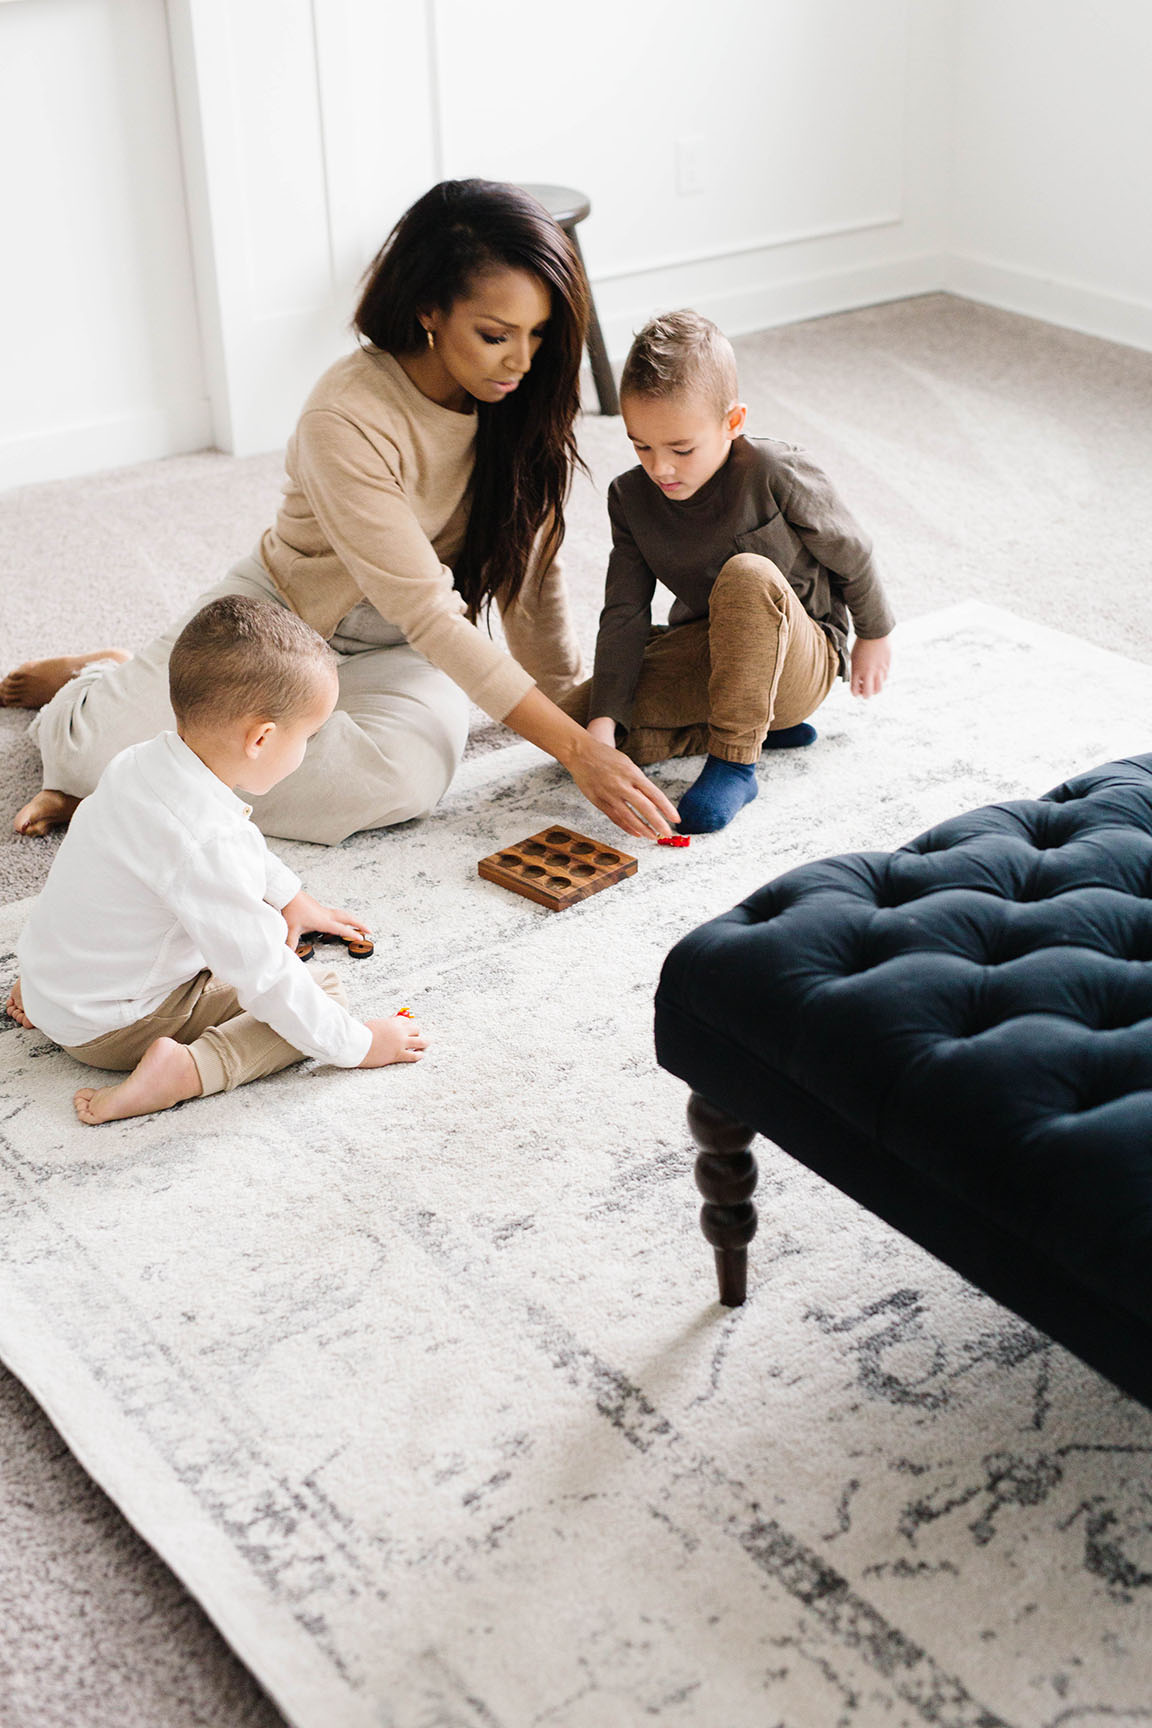 Keep your carpet cleaned with Zerorez so your family can be as comfortable as possible.